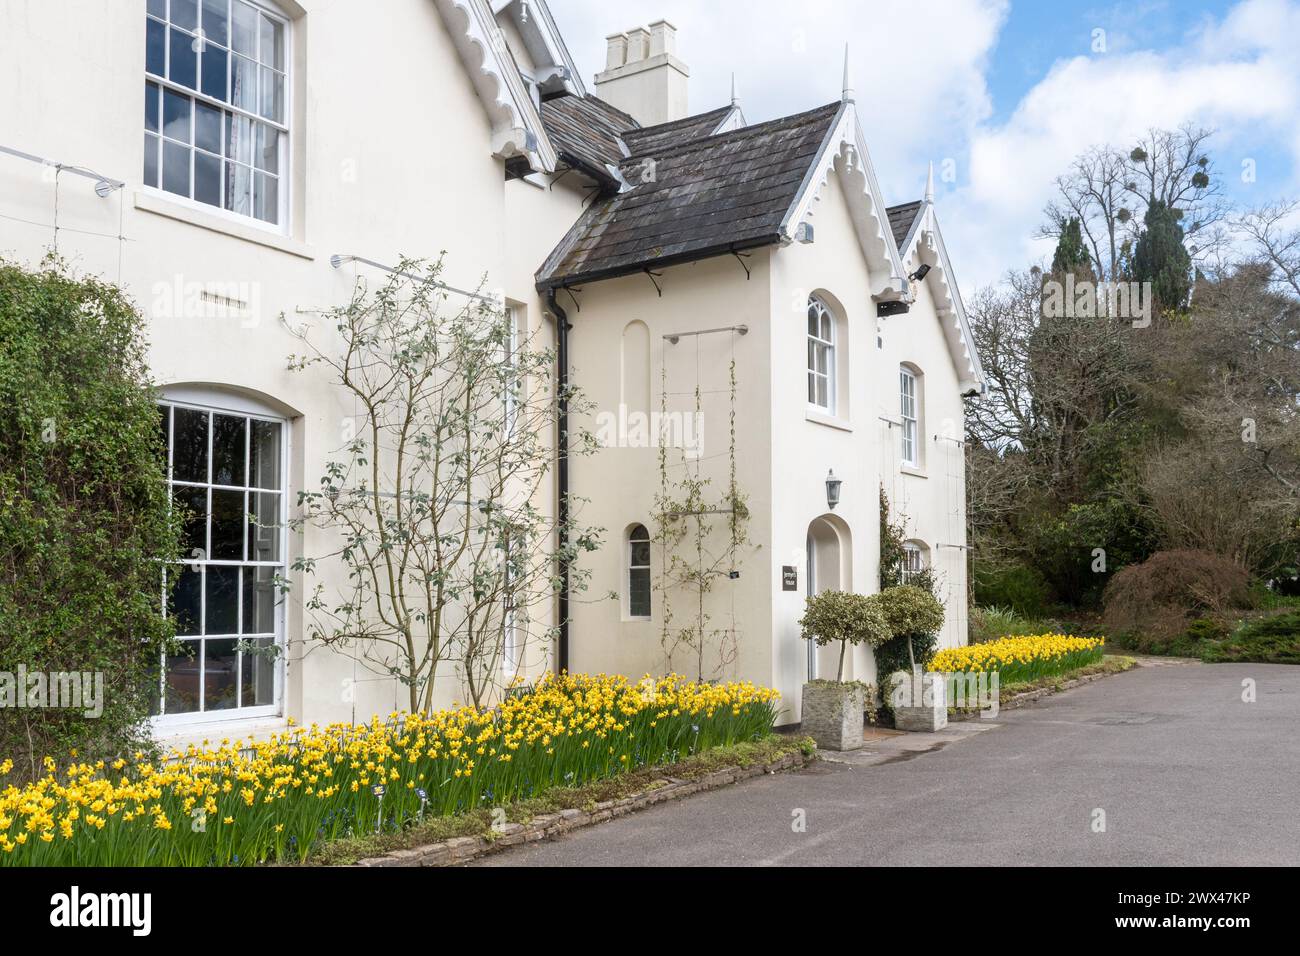 Jermyn's House at Sir Harold Hillier Gardens, a visitor attraction in Hampshire, England, UK, with daffodils in flower during March or spring Stock Photo